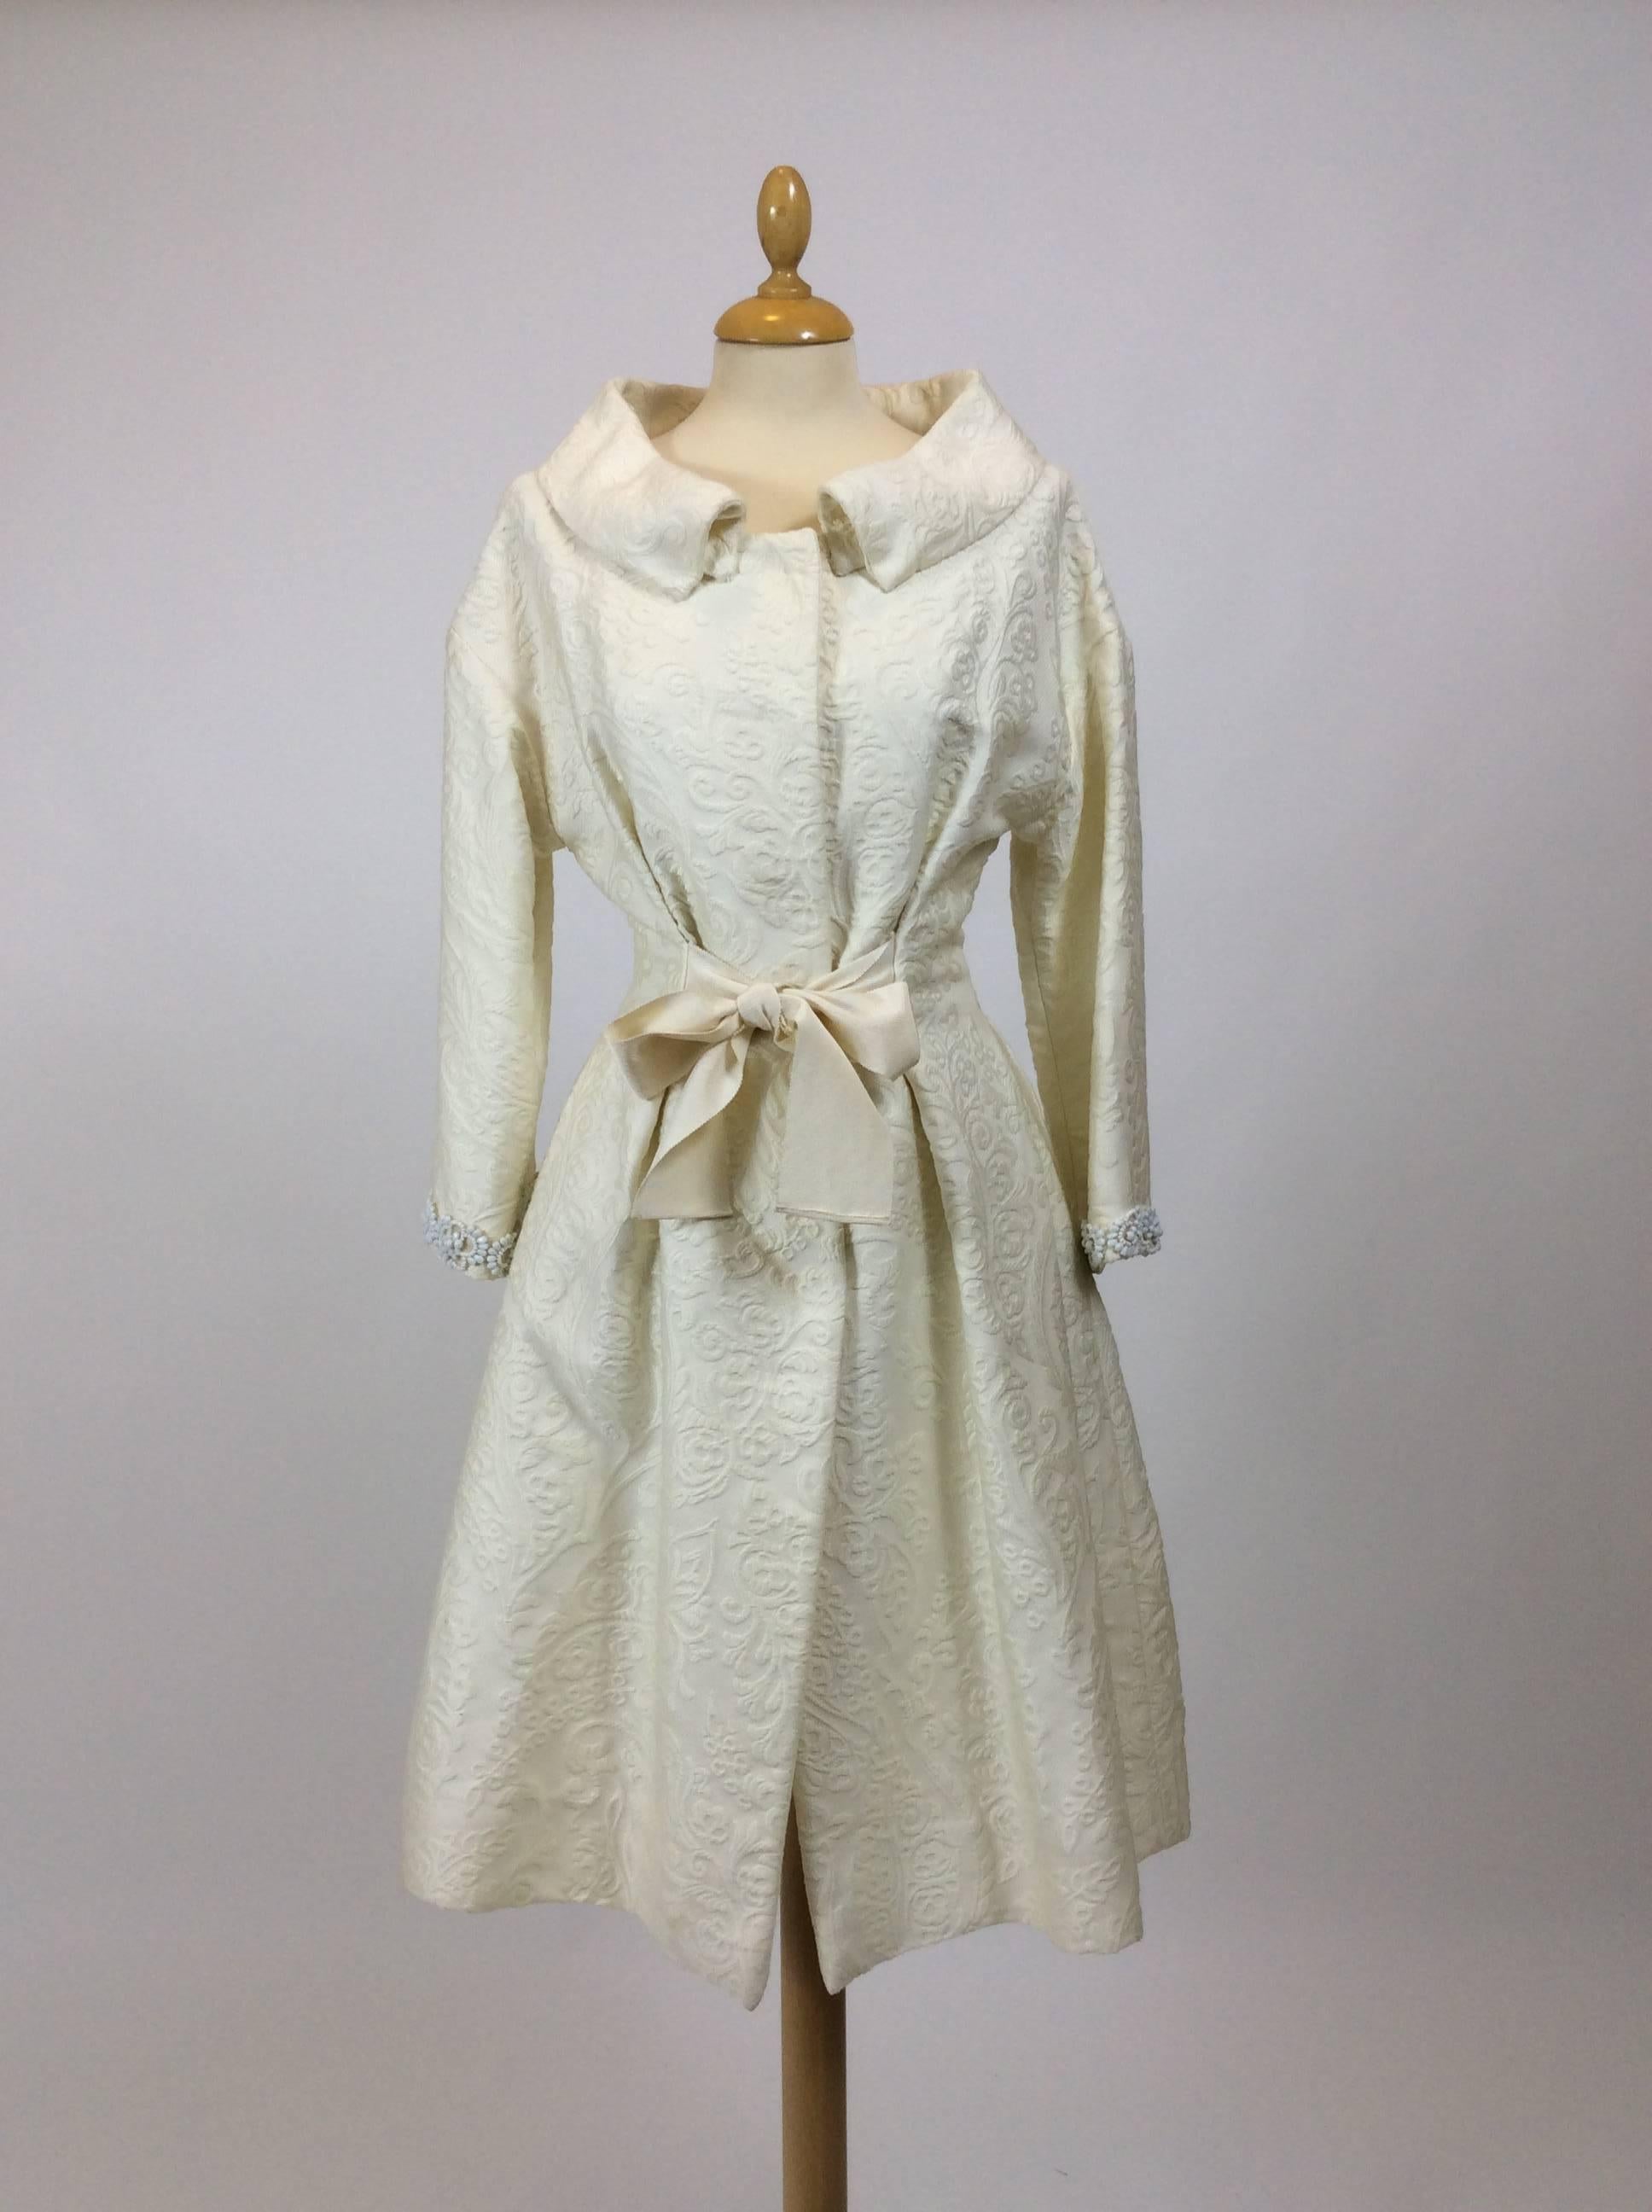 This lovely Giambattista Valli overcoat is in a white ivory brocade cotton and silk  fabric.It has snaps closure, 3/4 sleeves with embroidered beadeds hem sleeves, round collar and grosgrain waist sash.It has two sides pockets and pleateds